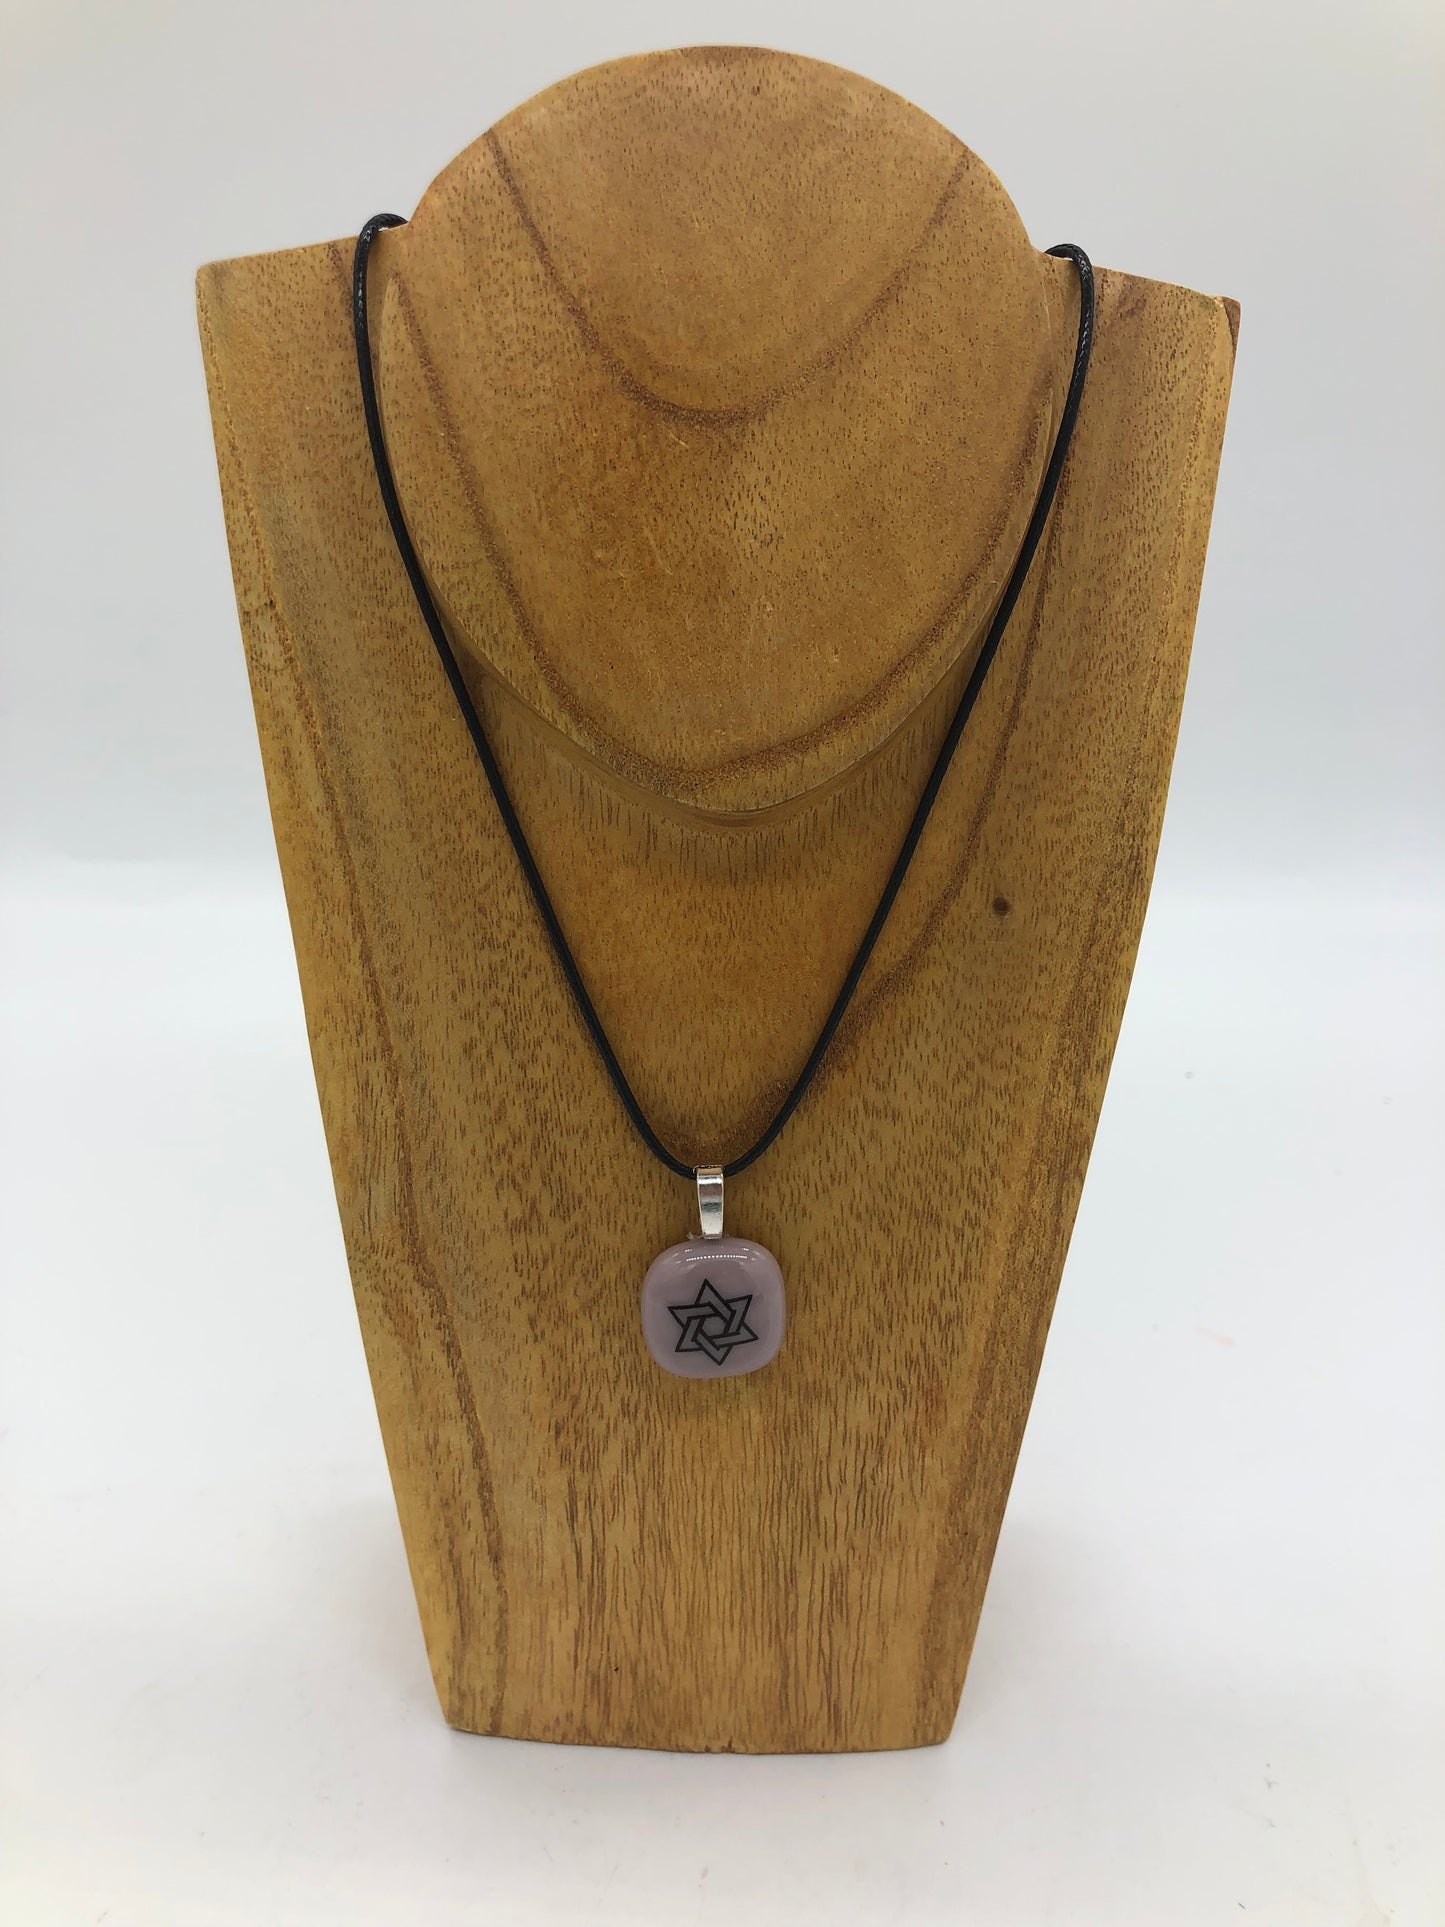 Fused glass necklace on a black cord, displayed on wooden holder.  Necklace design is a mauve  circle with outlined black star of David. 